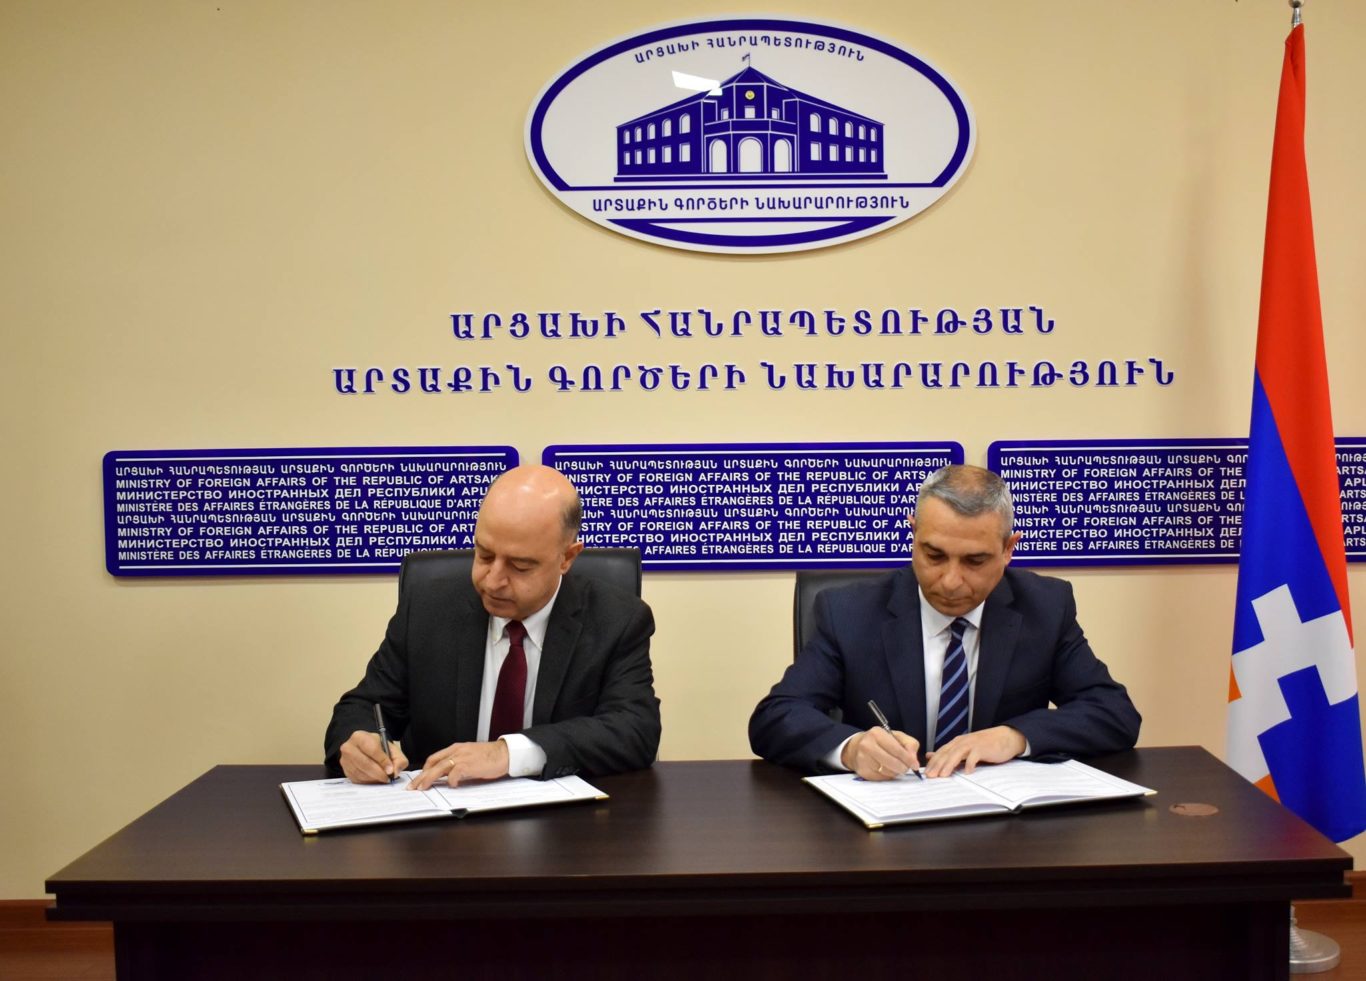 Memorandum of Cooperation between Haigazian University and the Ministry of Foreign Affairs of the Republic of Artsakh